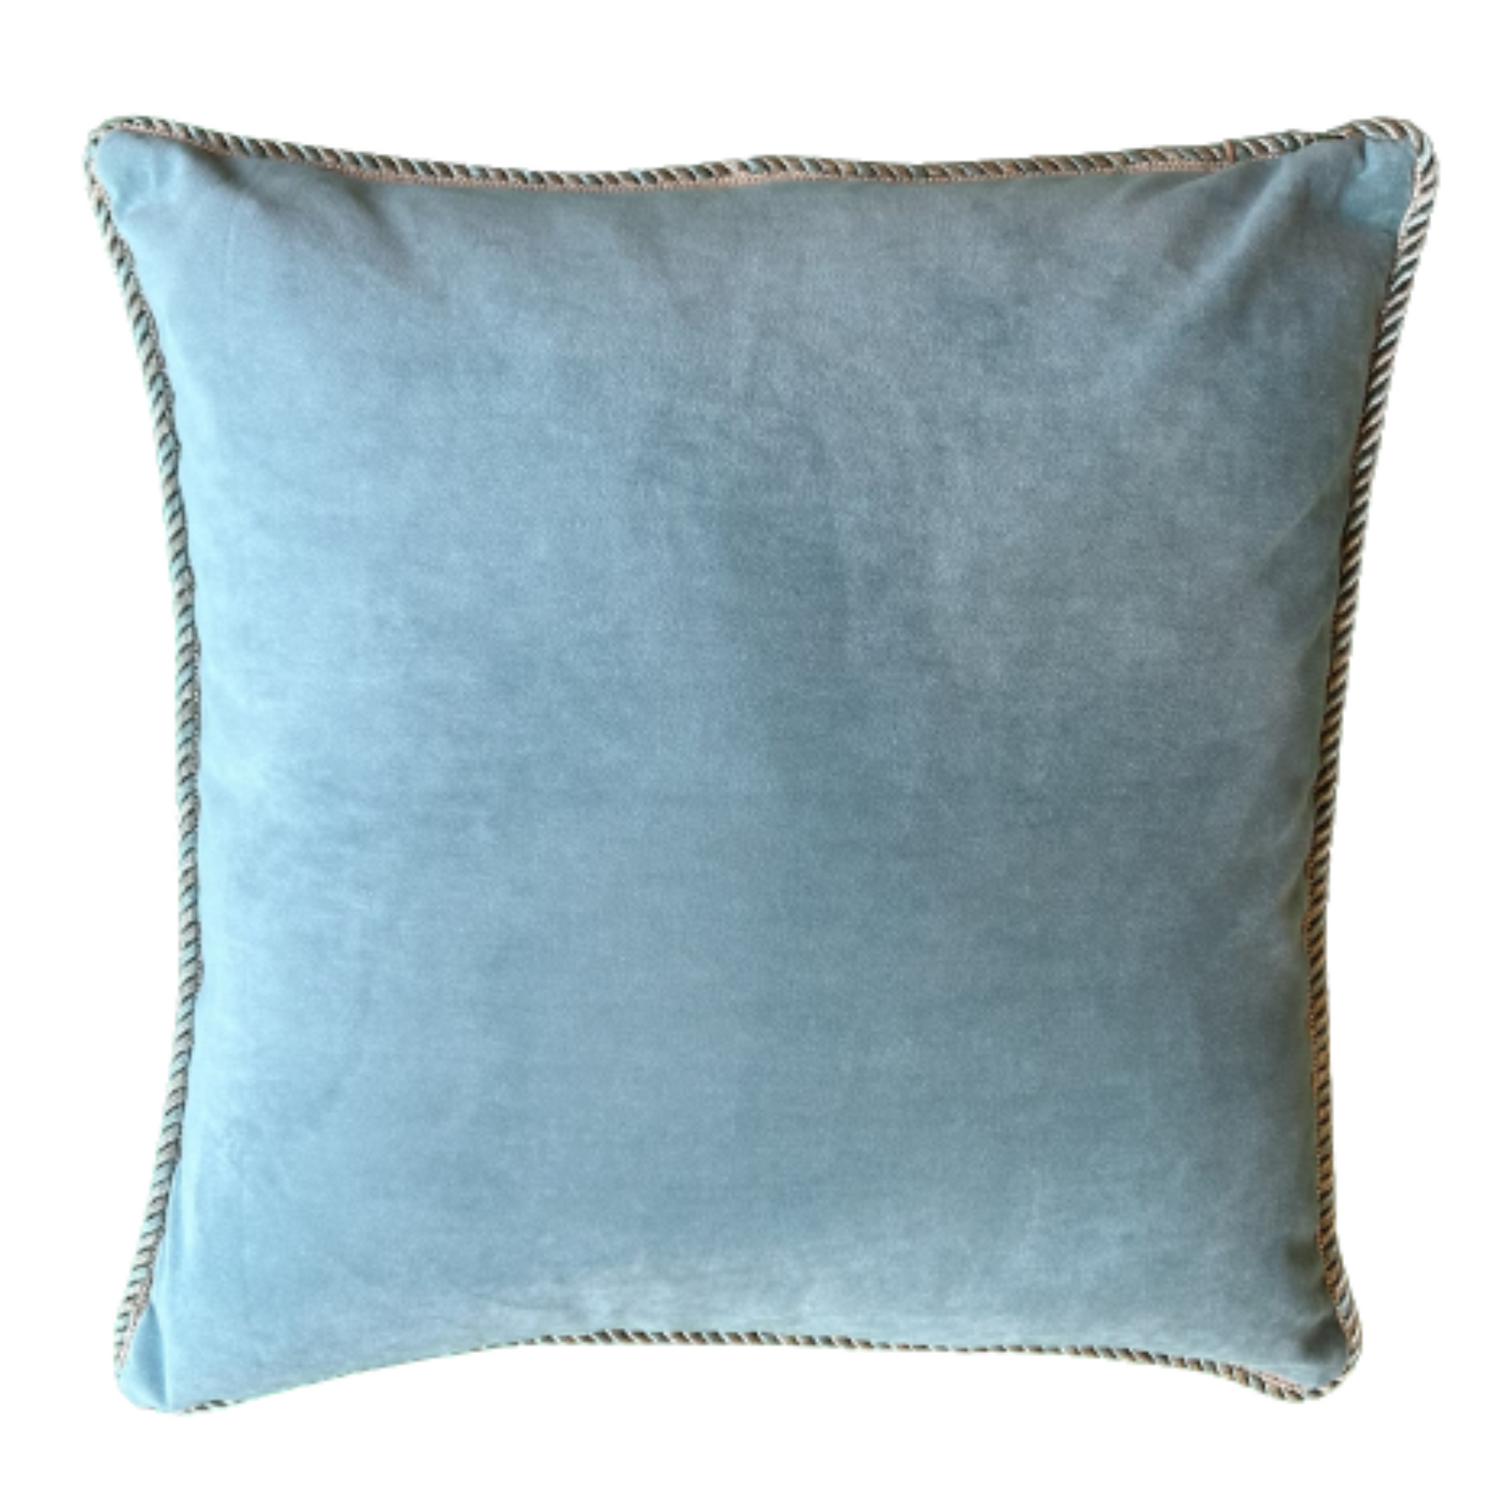 William Yeoward Linen and Velvet 25 x 25 Square Decorative Designer Pillow Front with Down Feather Insert